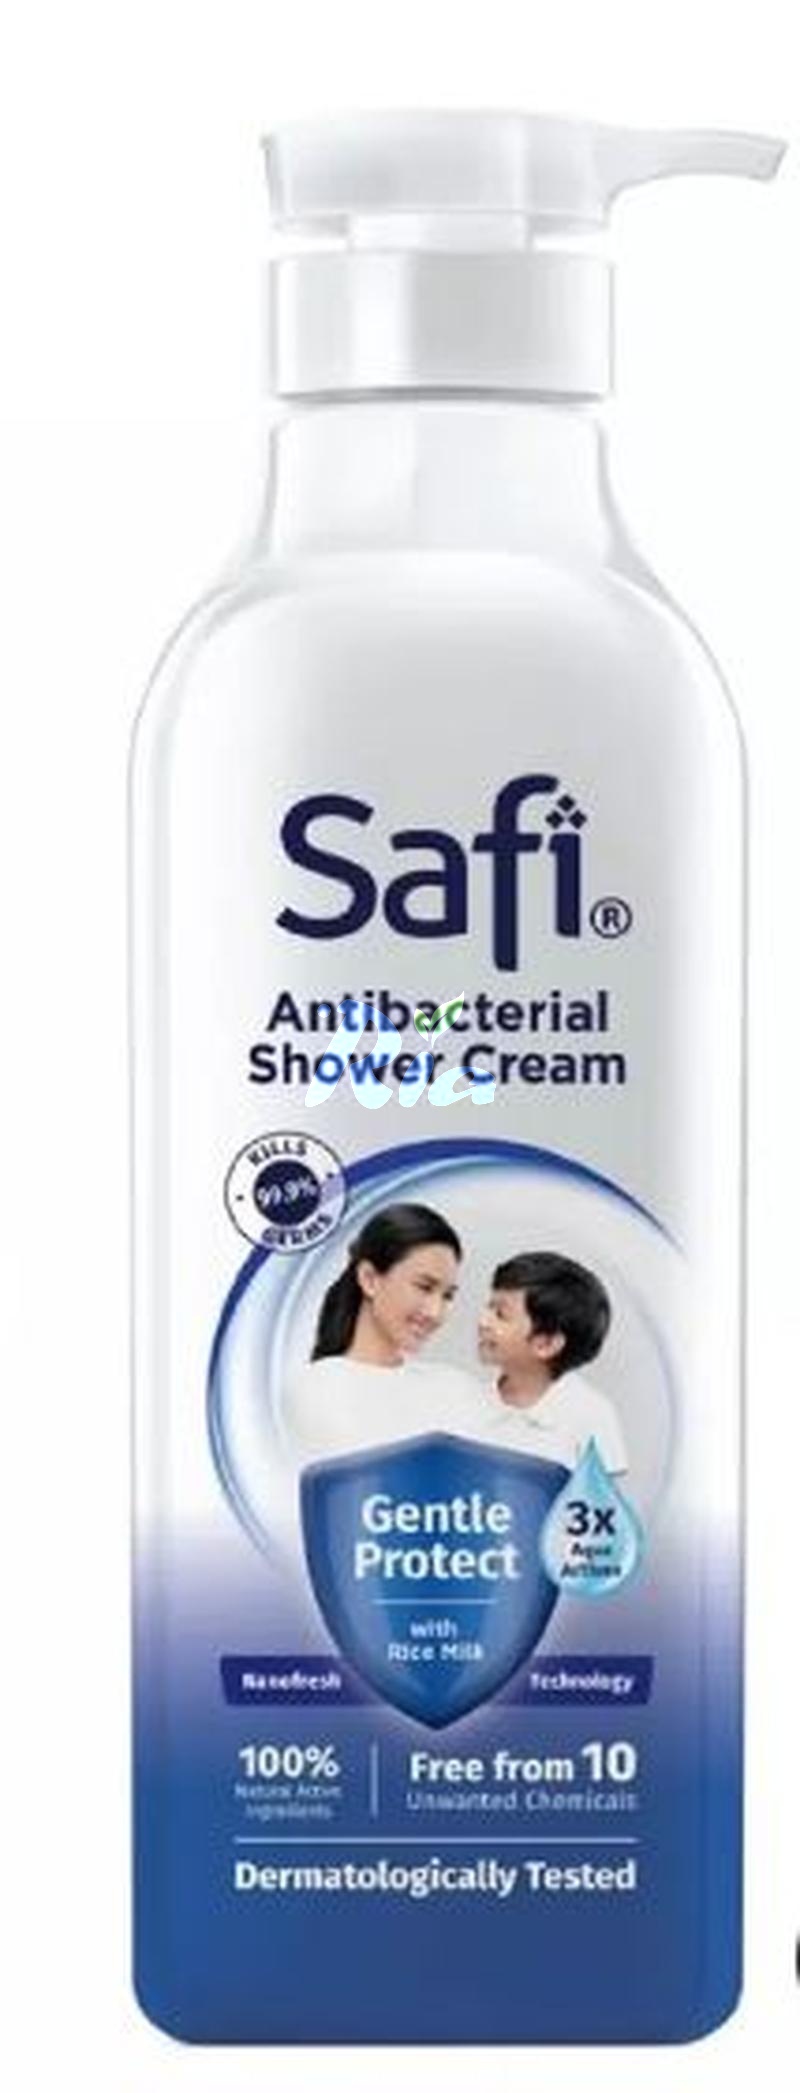 SAFI SHW 975G GENTLE PROTECT